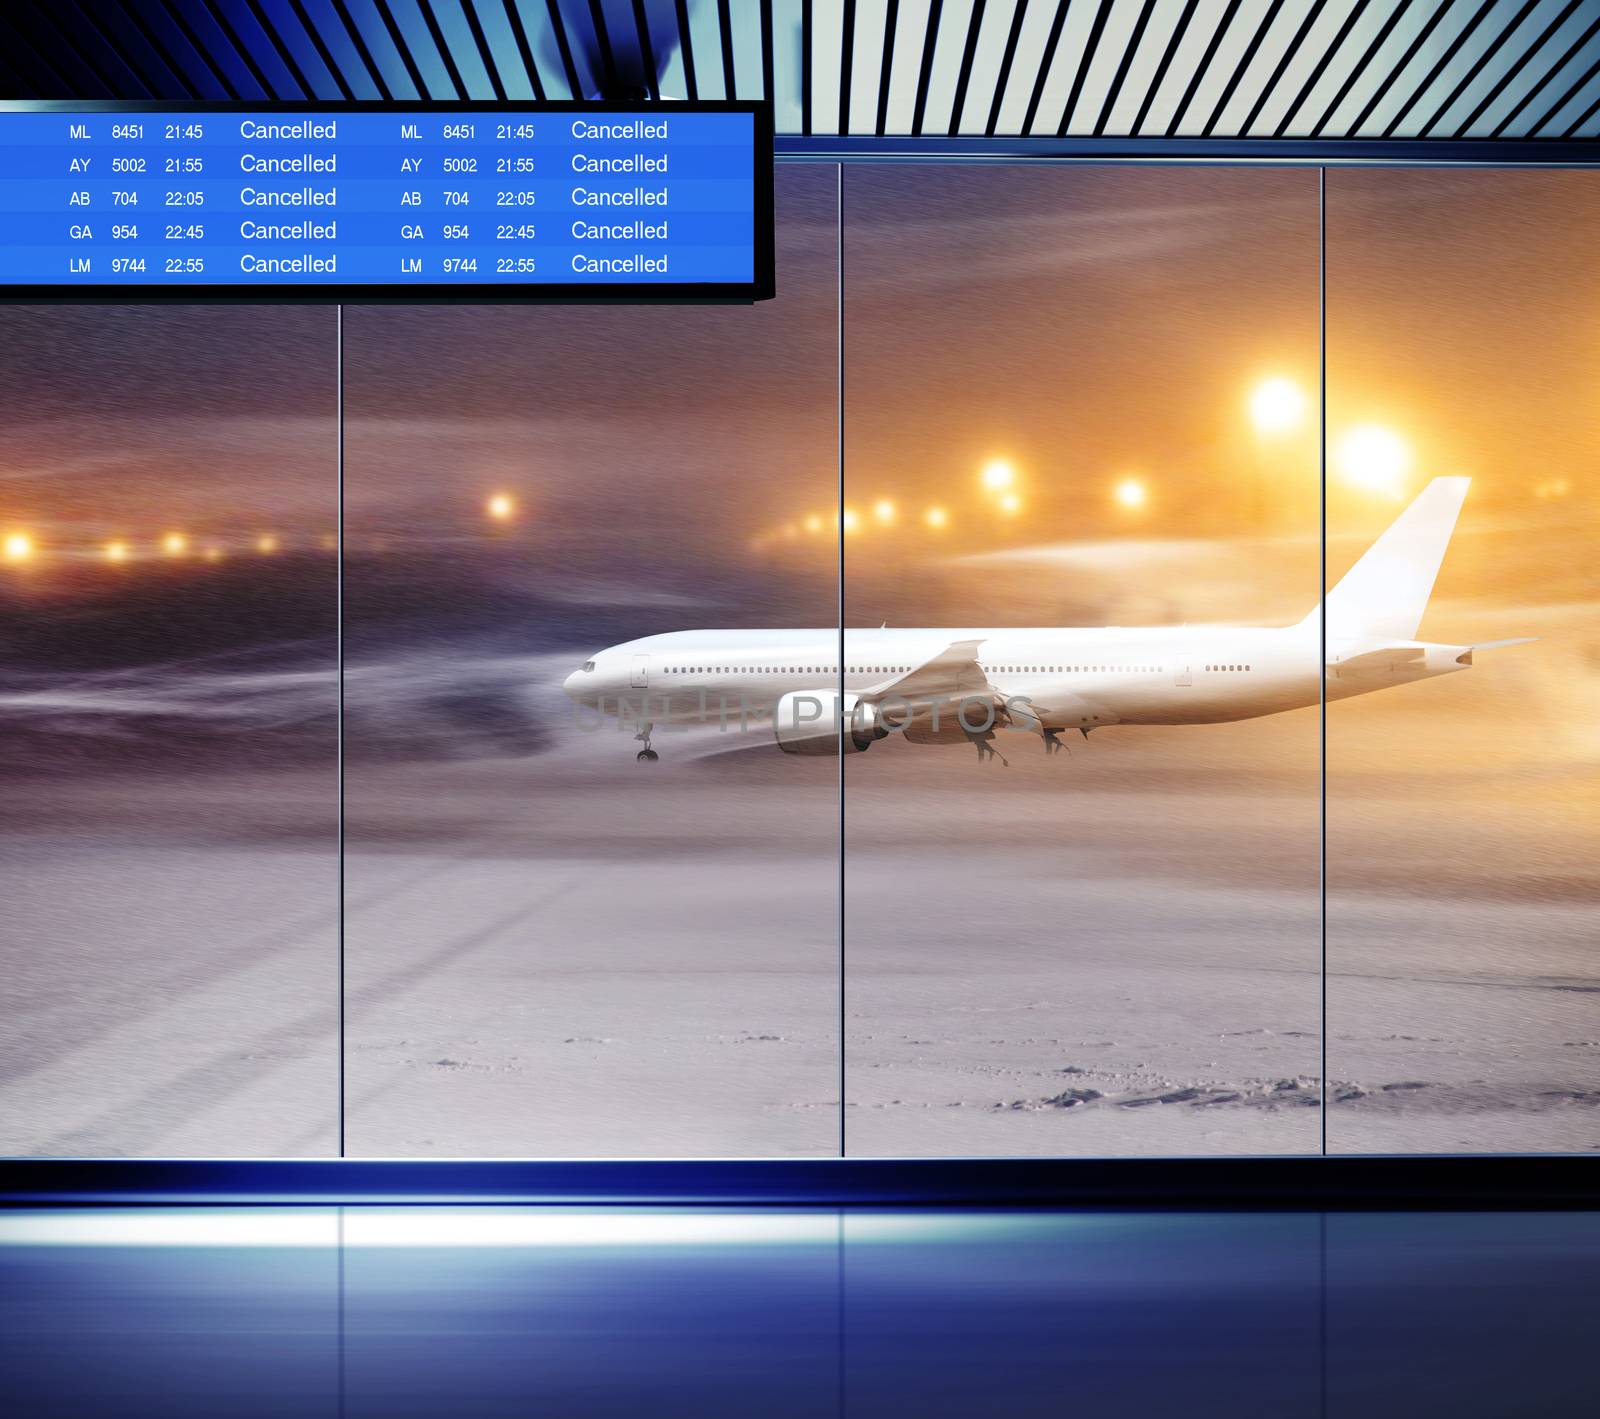 Non flying weather at airport, white plane in snowstorm